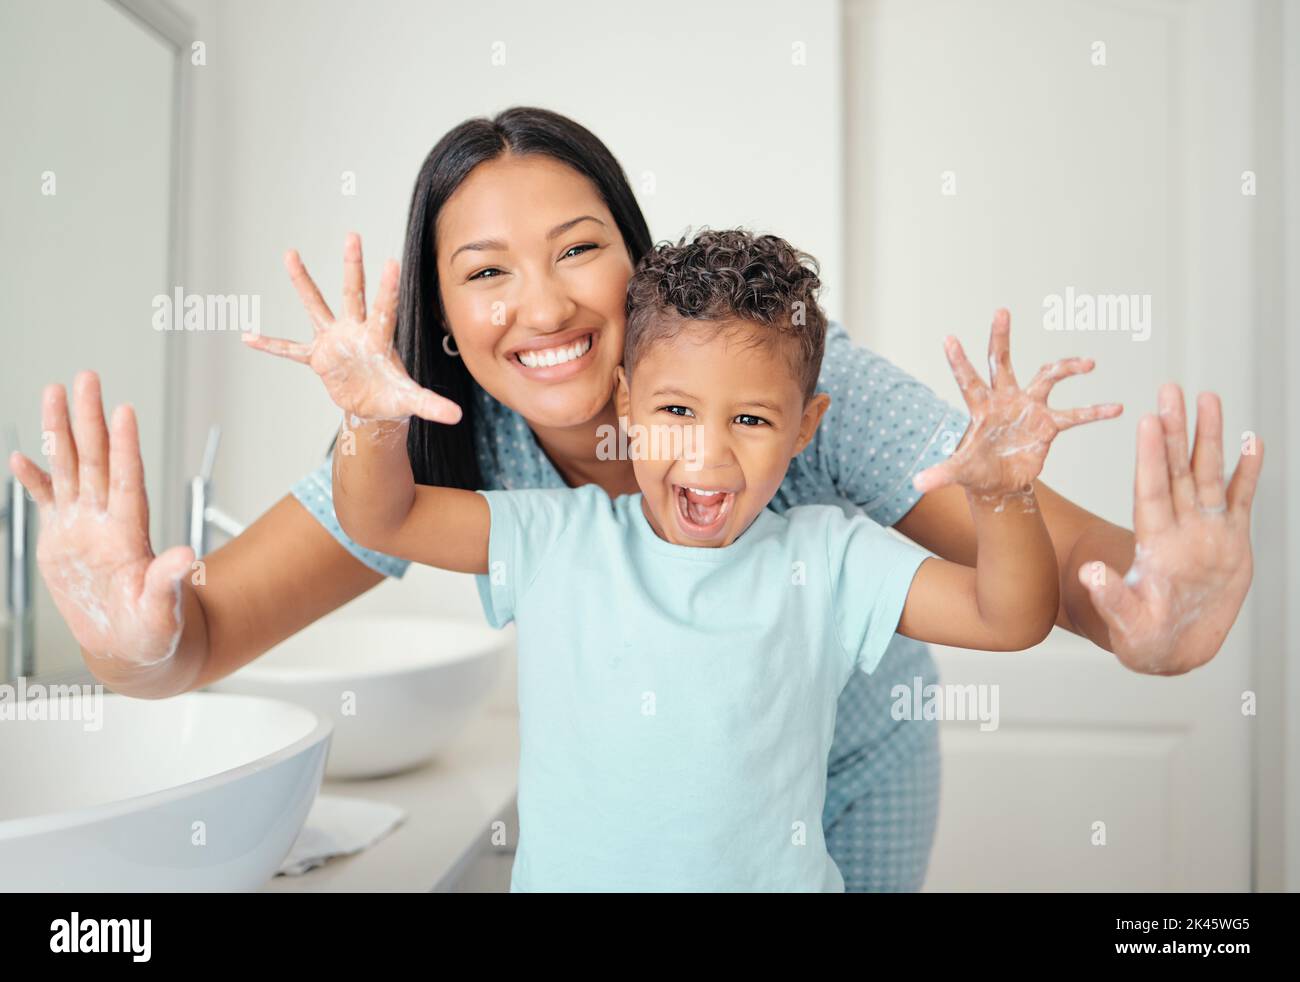 Mother and son in bathroom with clean hands, open palms that are cleaned and covered in foam teaching child hand washing. Cheerful parent help kid Stock Photo